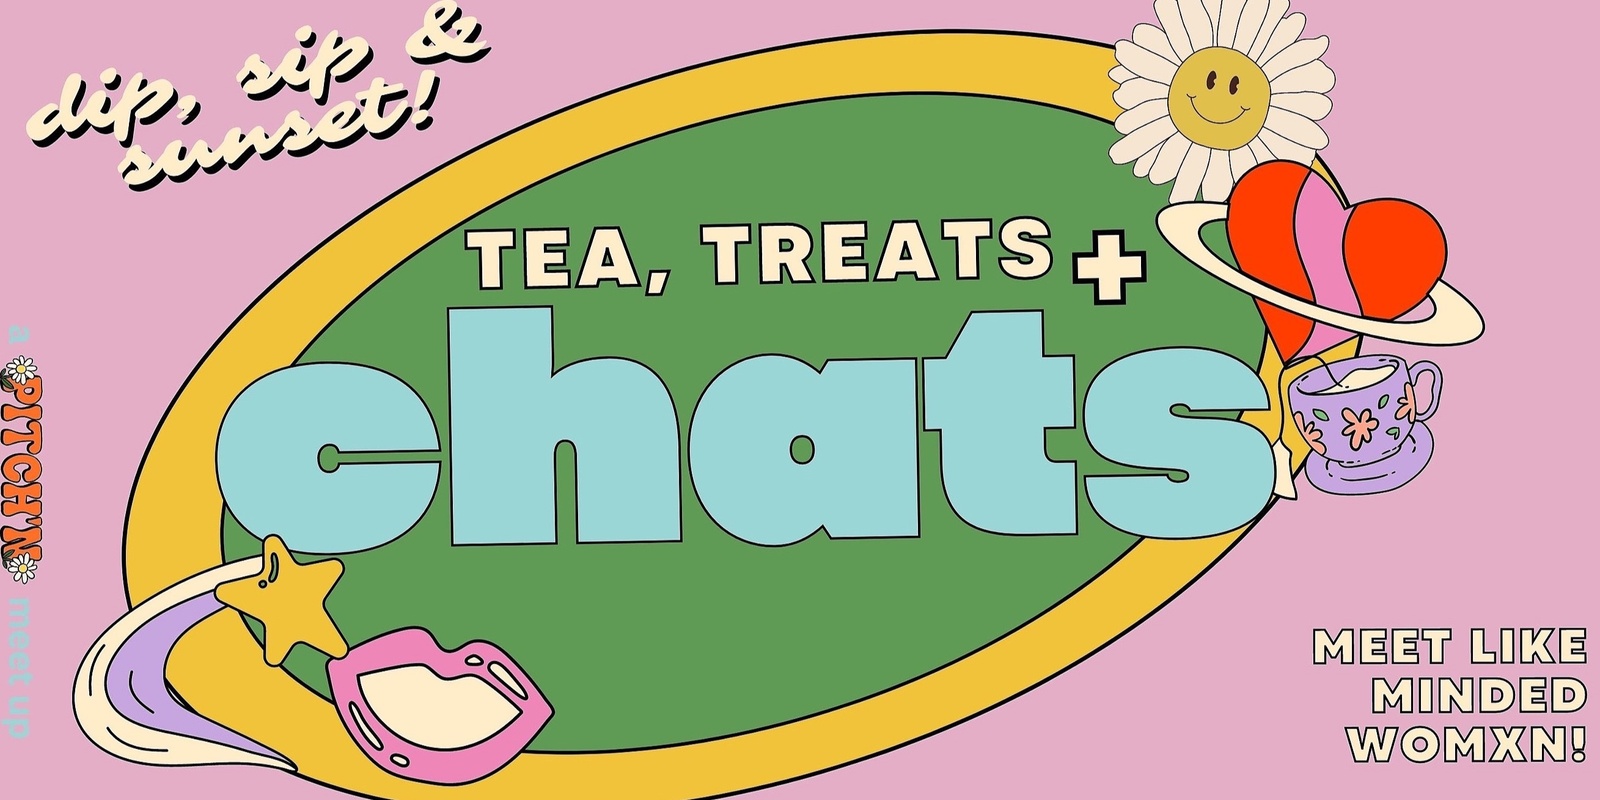 Banner image for Tea, Treats + Chats